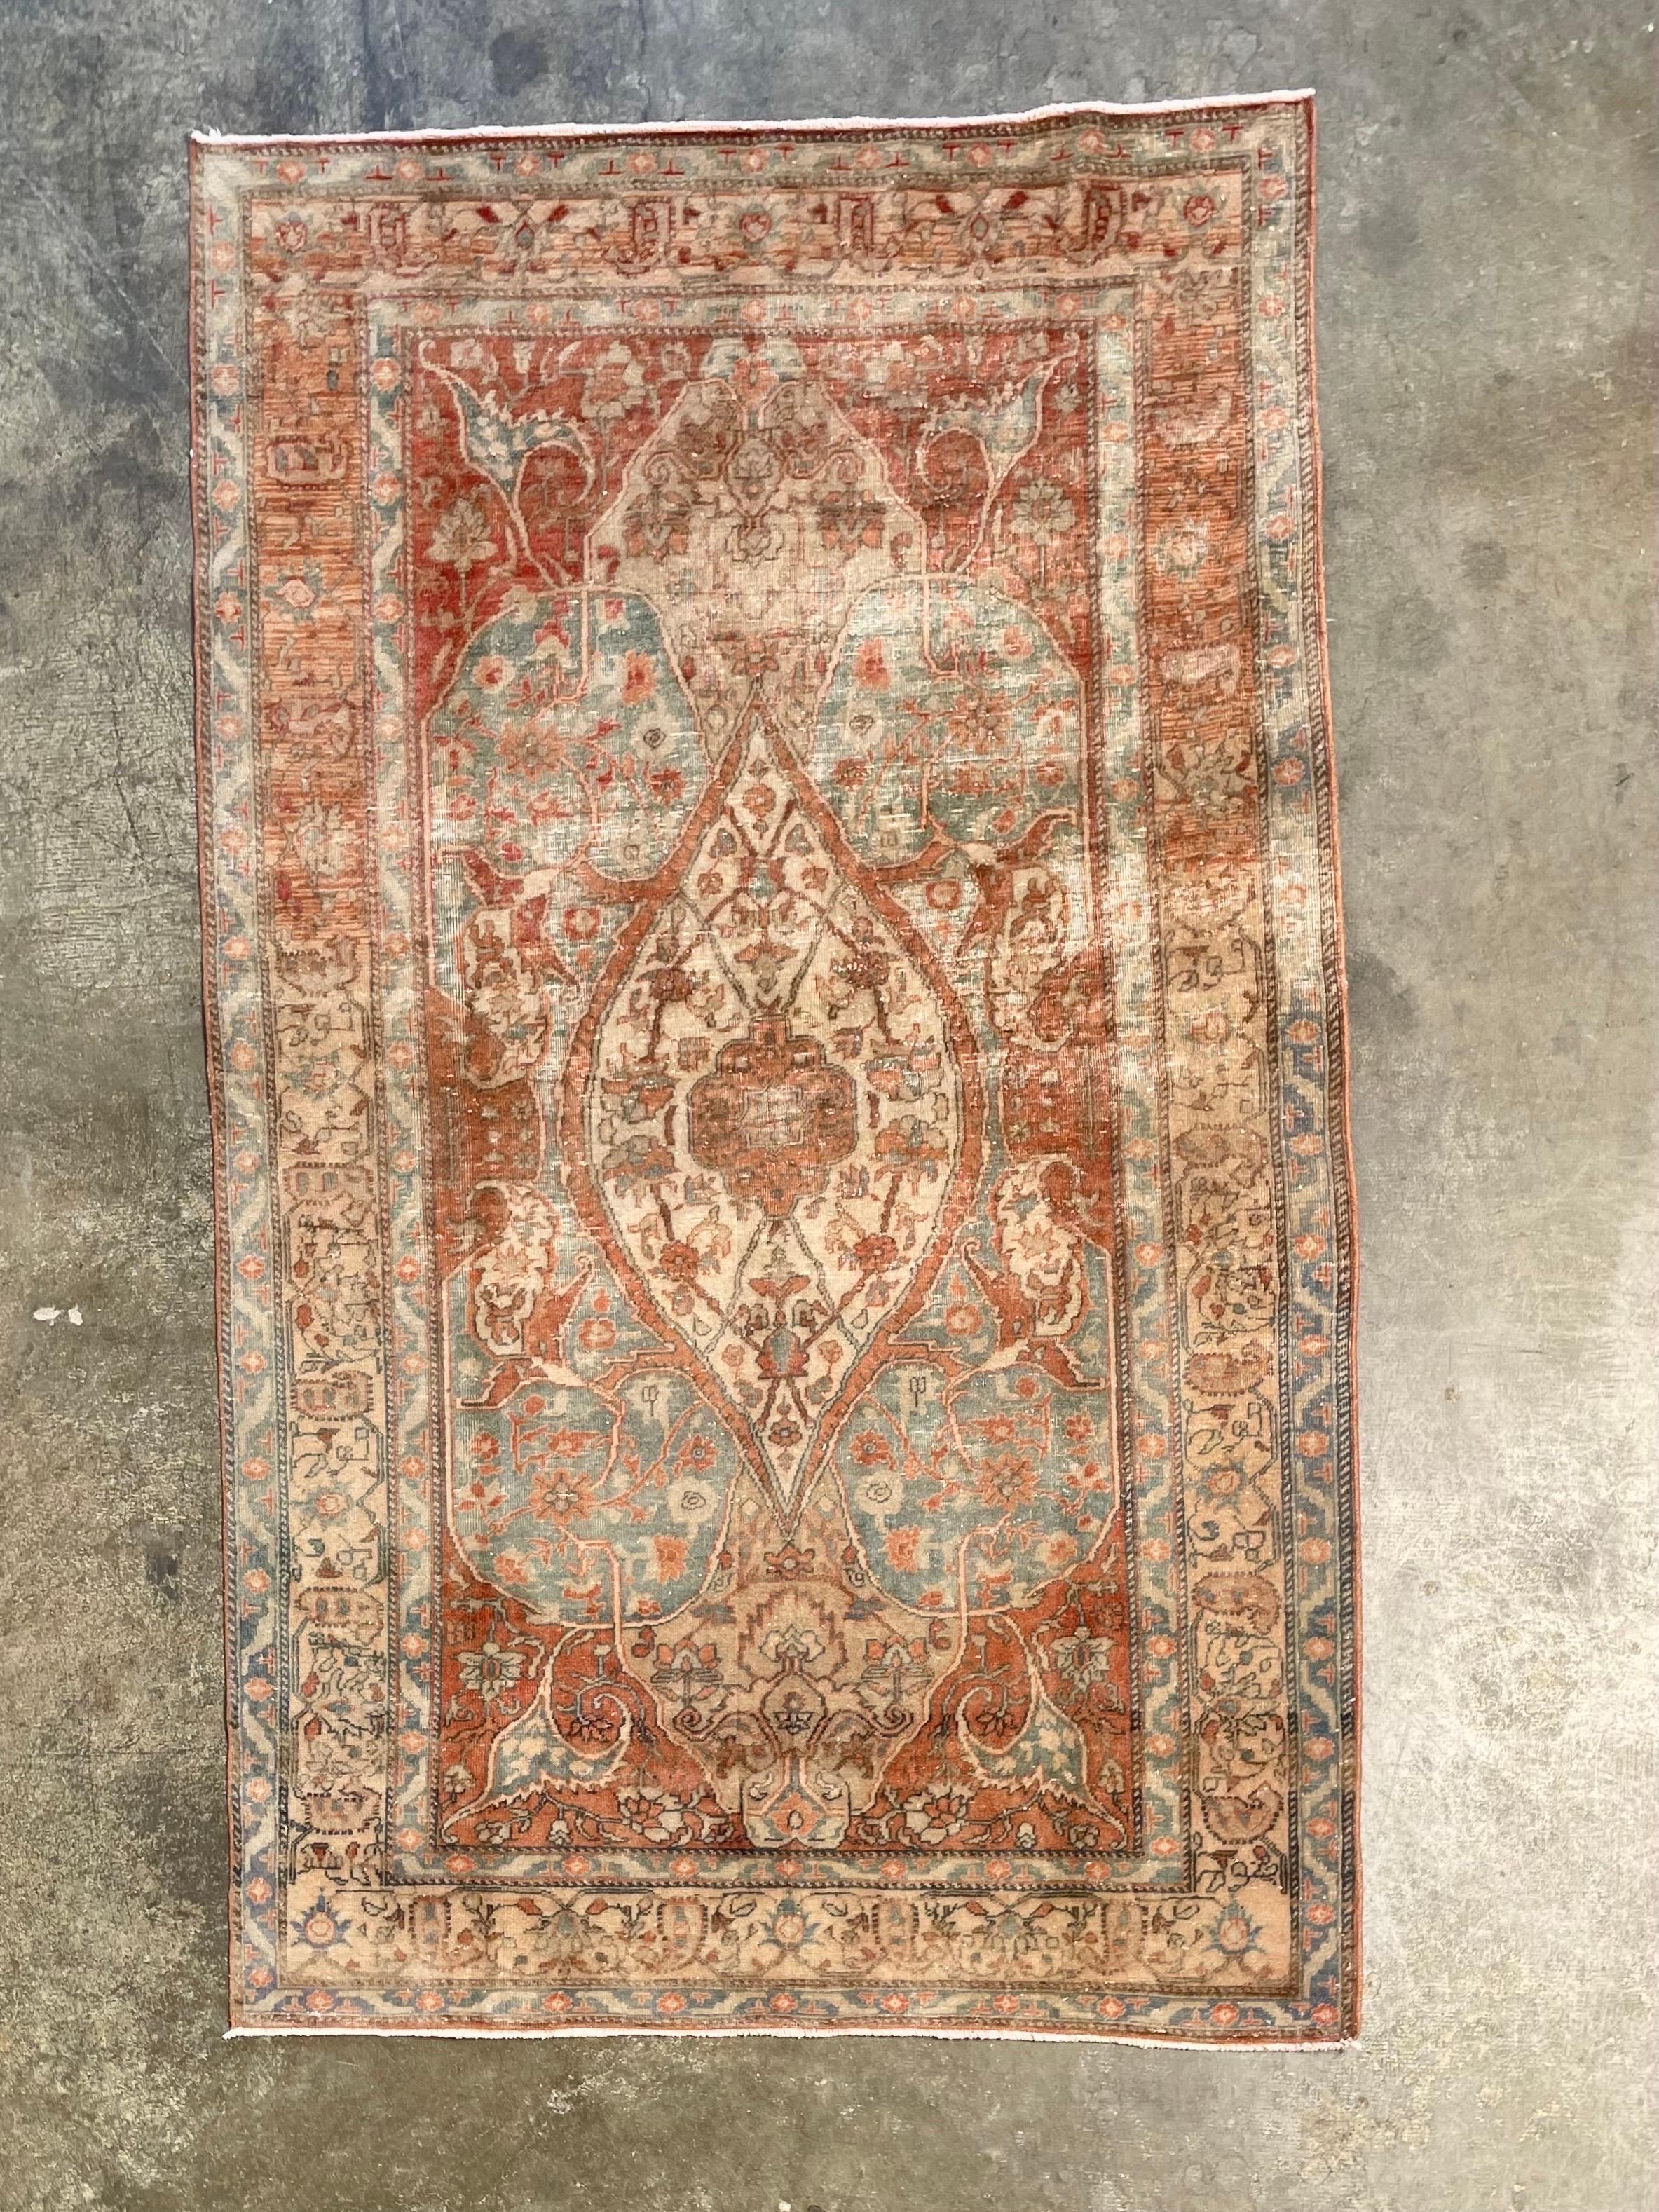 Vintage Turkish rug
This Turkish rug is an heirloom-quality antique area rug with timeless tones and an intricate pattern sure to add history, beauty and character to any space it adorns. As with all vintage item this piece may have imperfections,